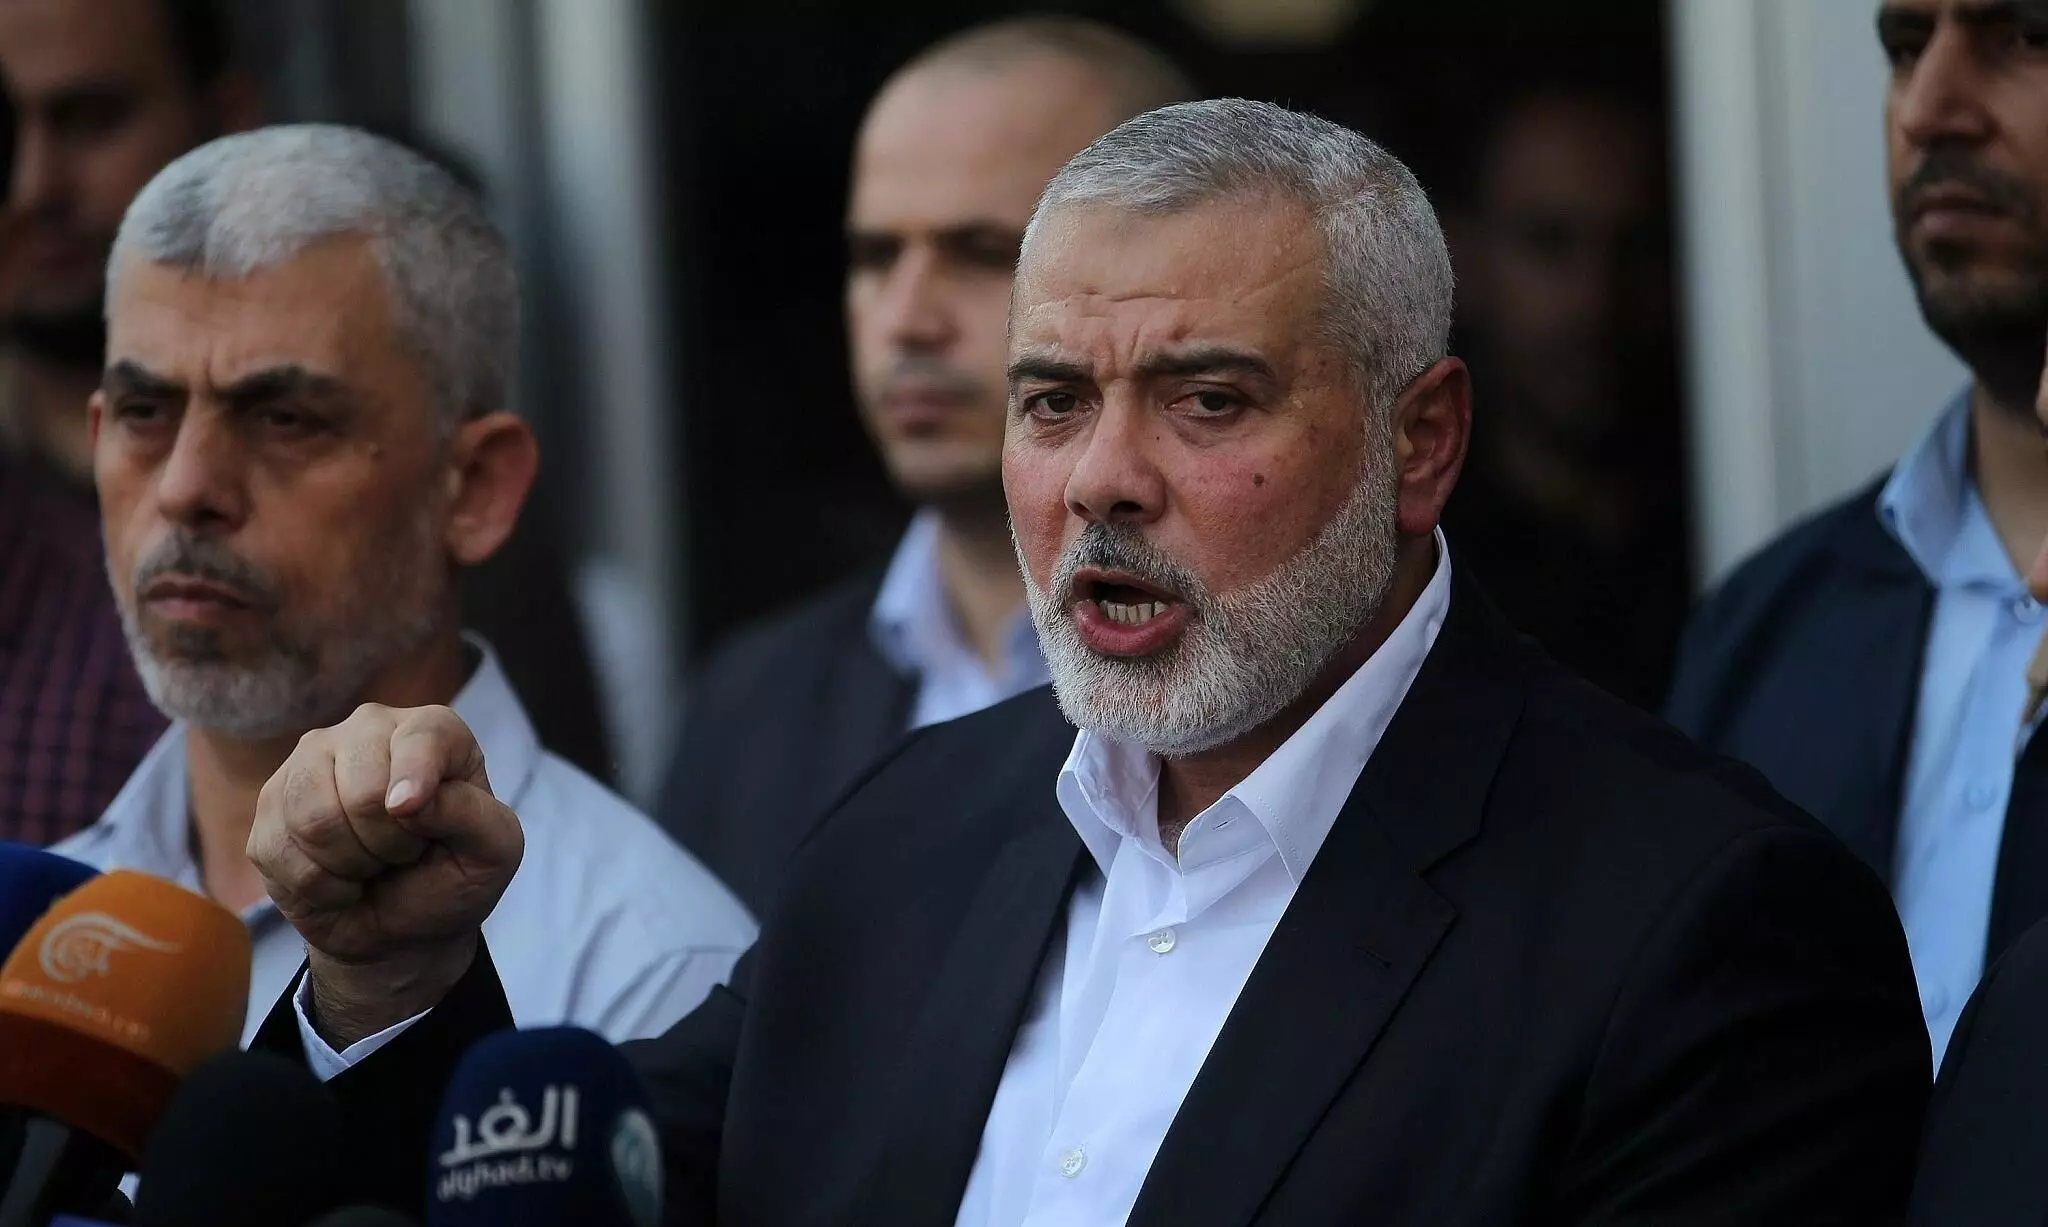 Hamas Ismail Haniyeh hints at progress in truce in Gaza over exchange of captives